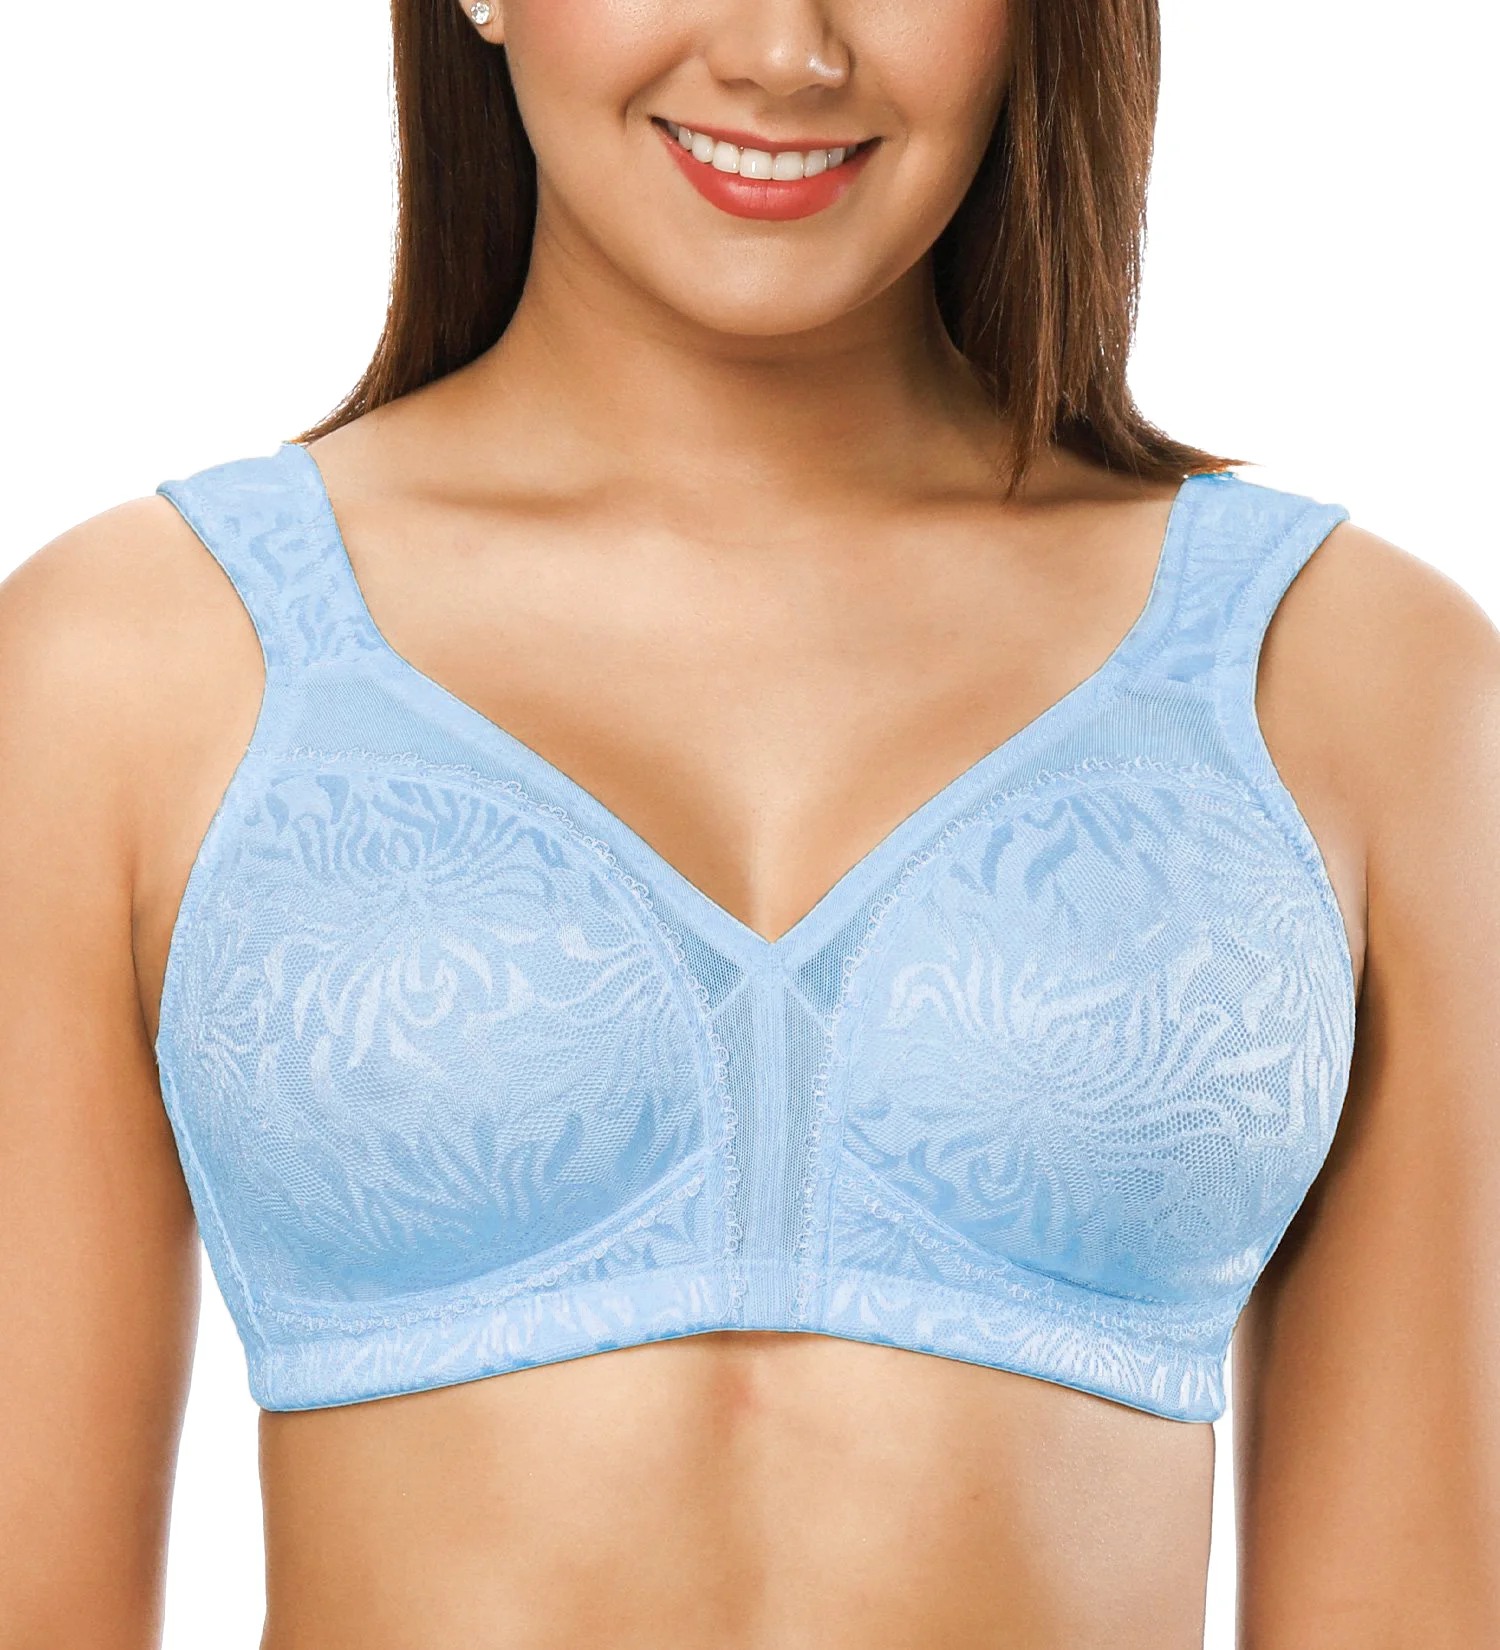  Womens Wireless Plus Size Lace Bra Unlined Full Coverage  Comfort Cotton Blue Mist Gray 38H